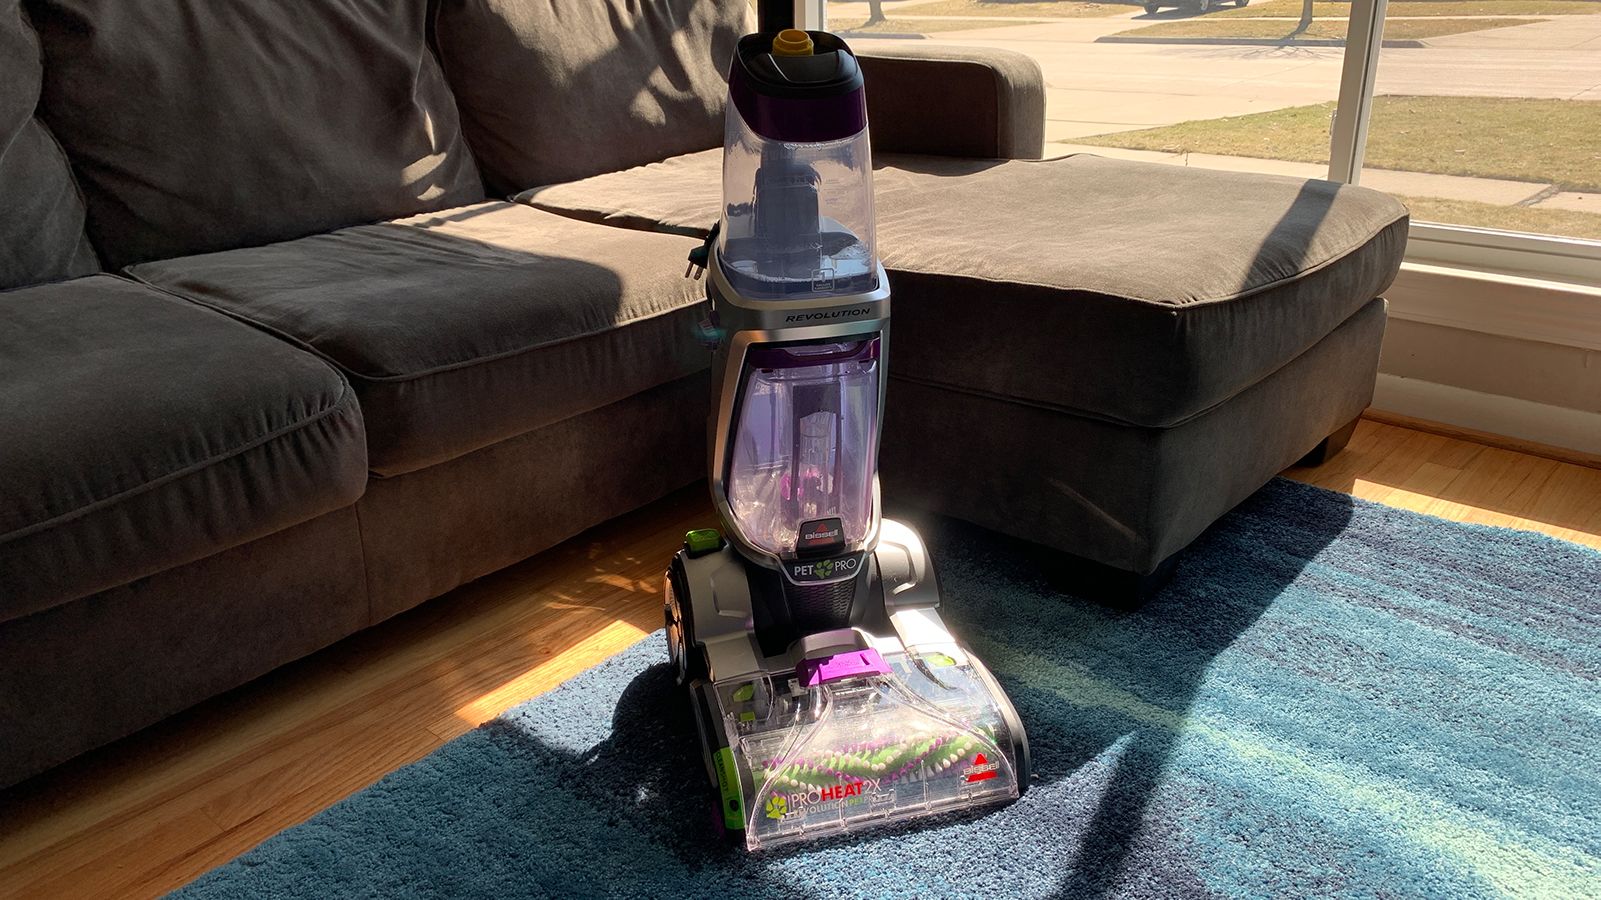 How To Remove Brush From Bissell Carpet Cleaner